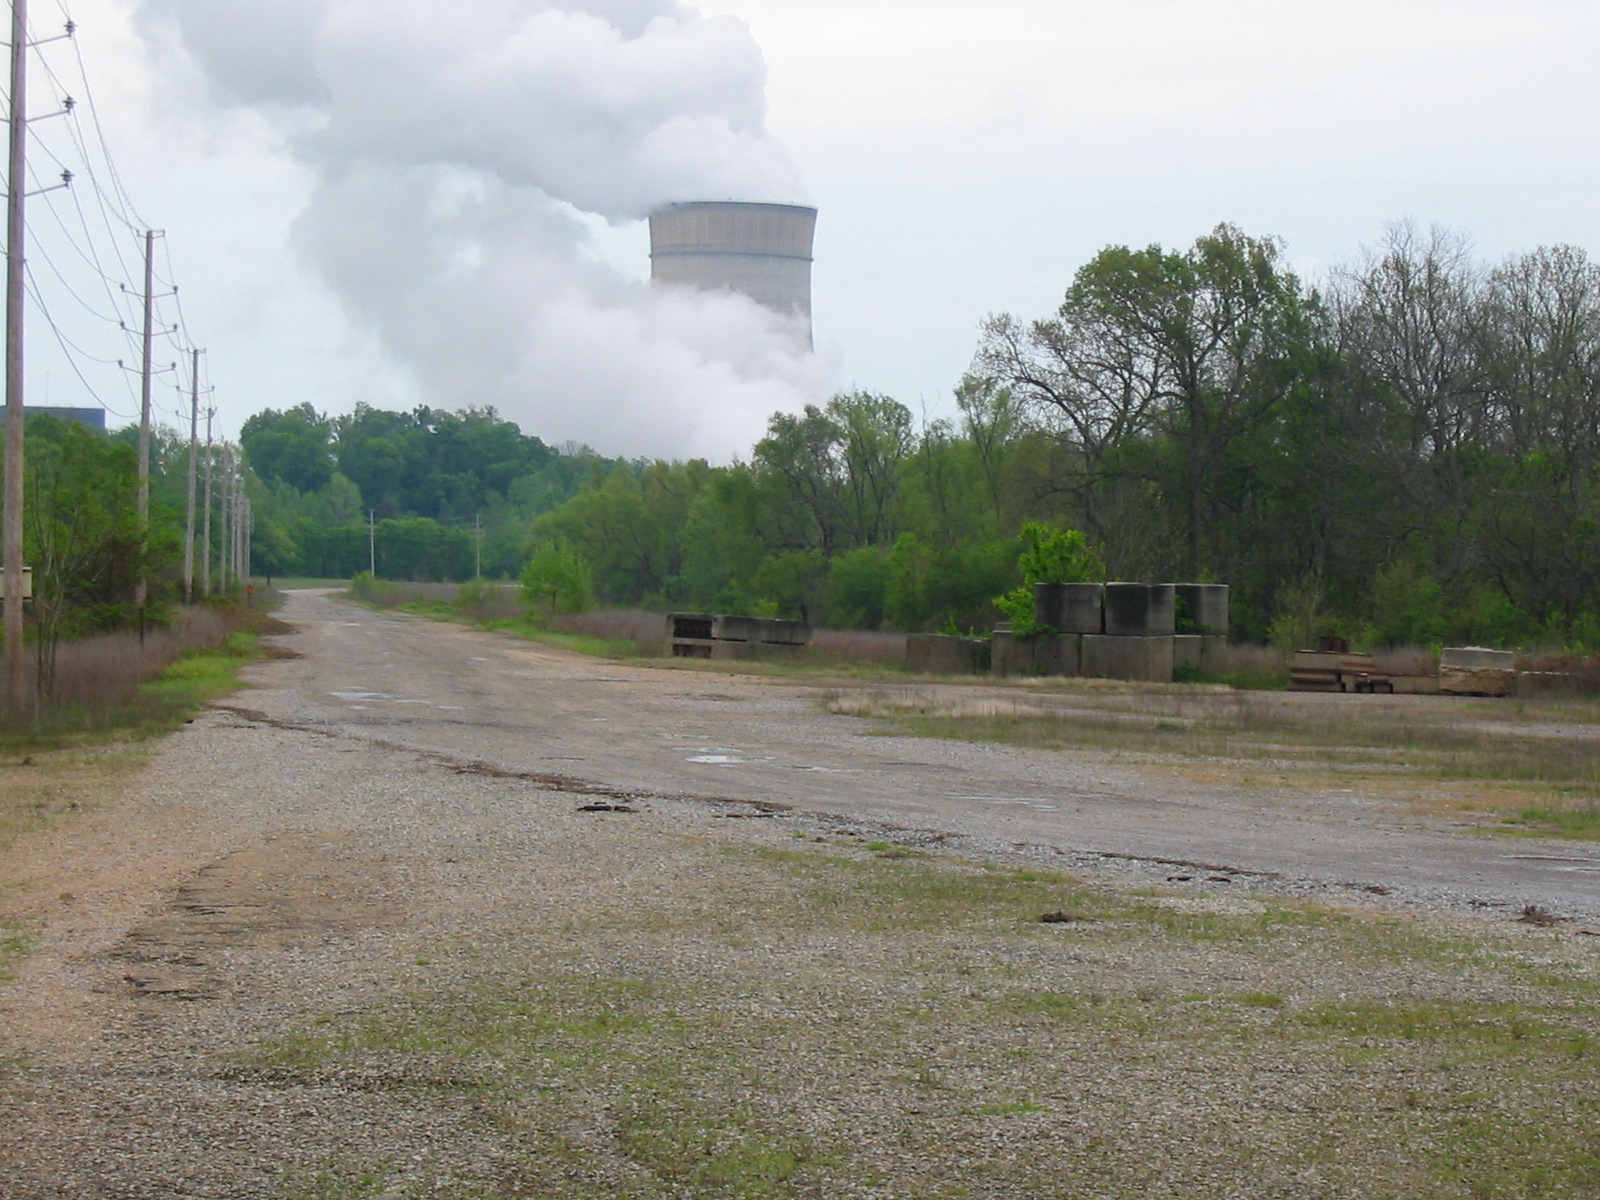 Gravel road and undeveloped wooded area outside the Grand Gulf Nuclear Station in Mississippi.